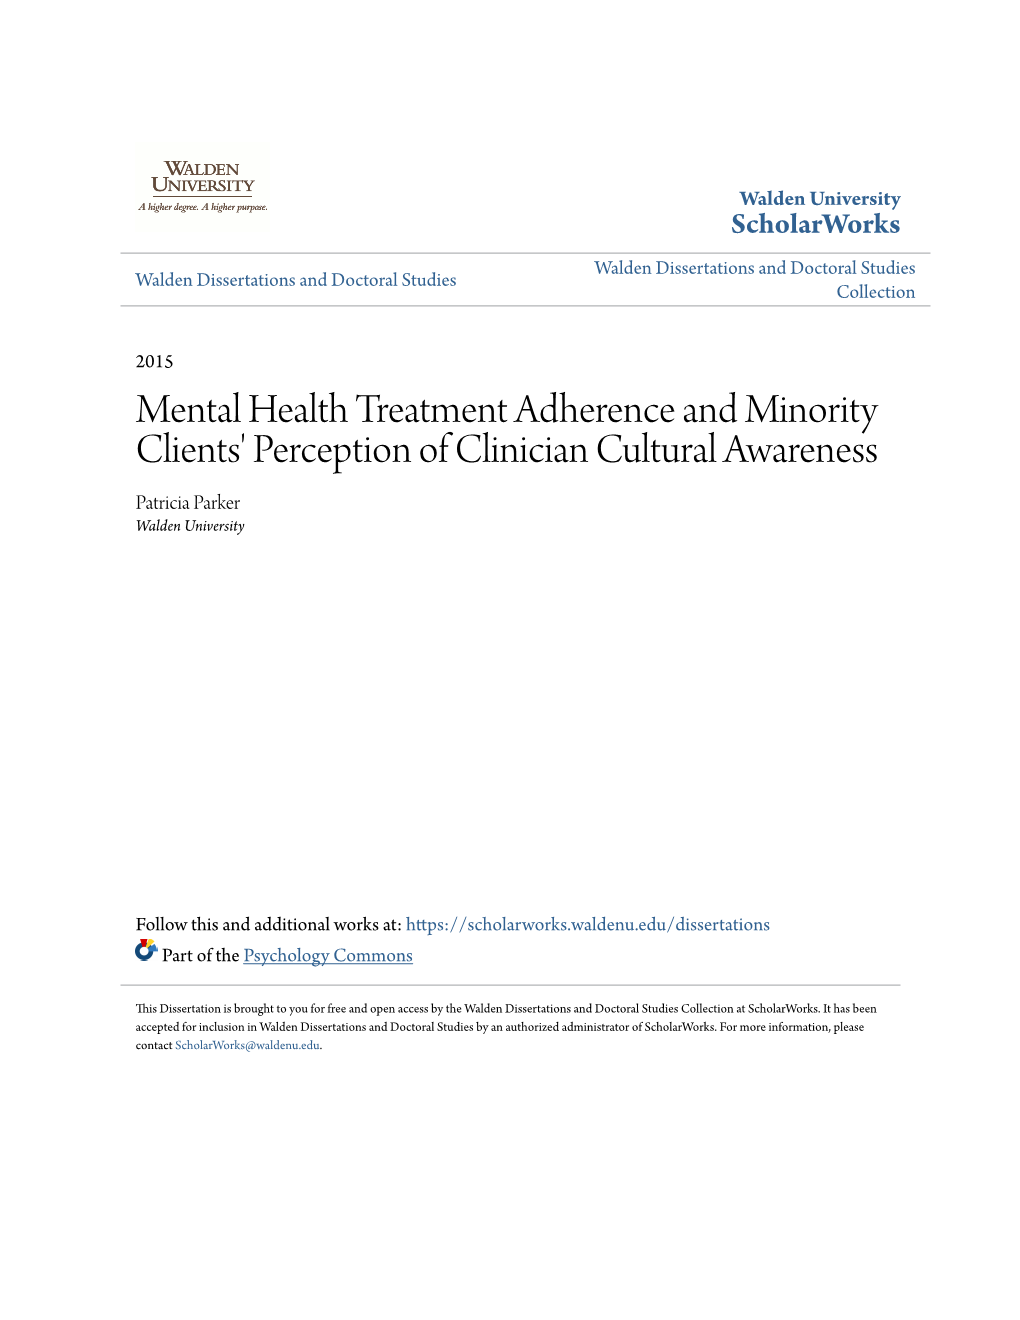 Mental Health Treatment Adherence and Minority Clients' Perception of Clinician Cultural Awareness Patricia Parker Walden University